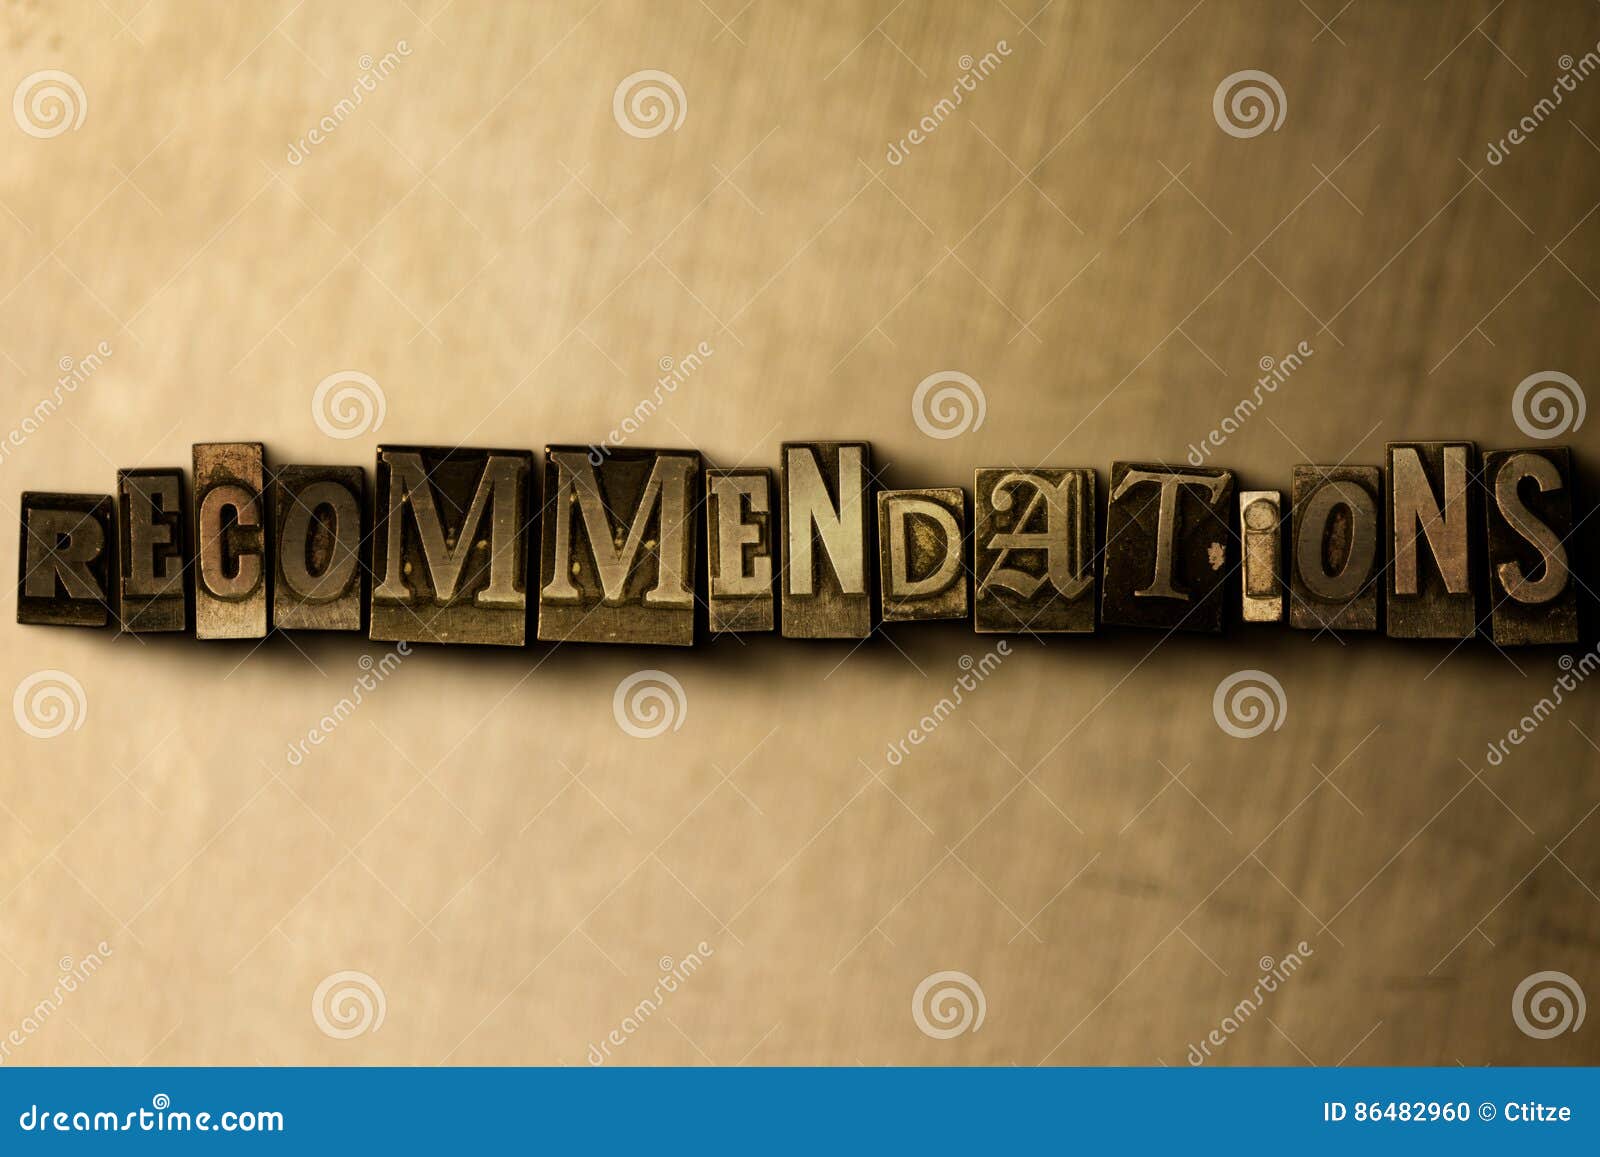 recommendations - close-up of grungy vintage typeset word on metal backdrop